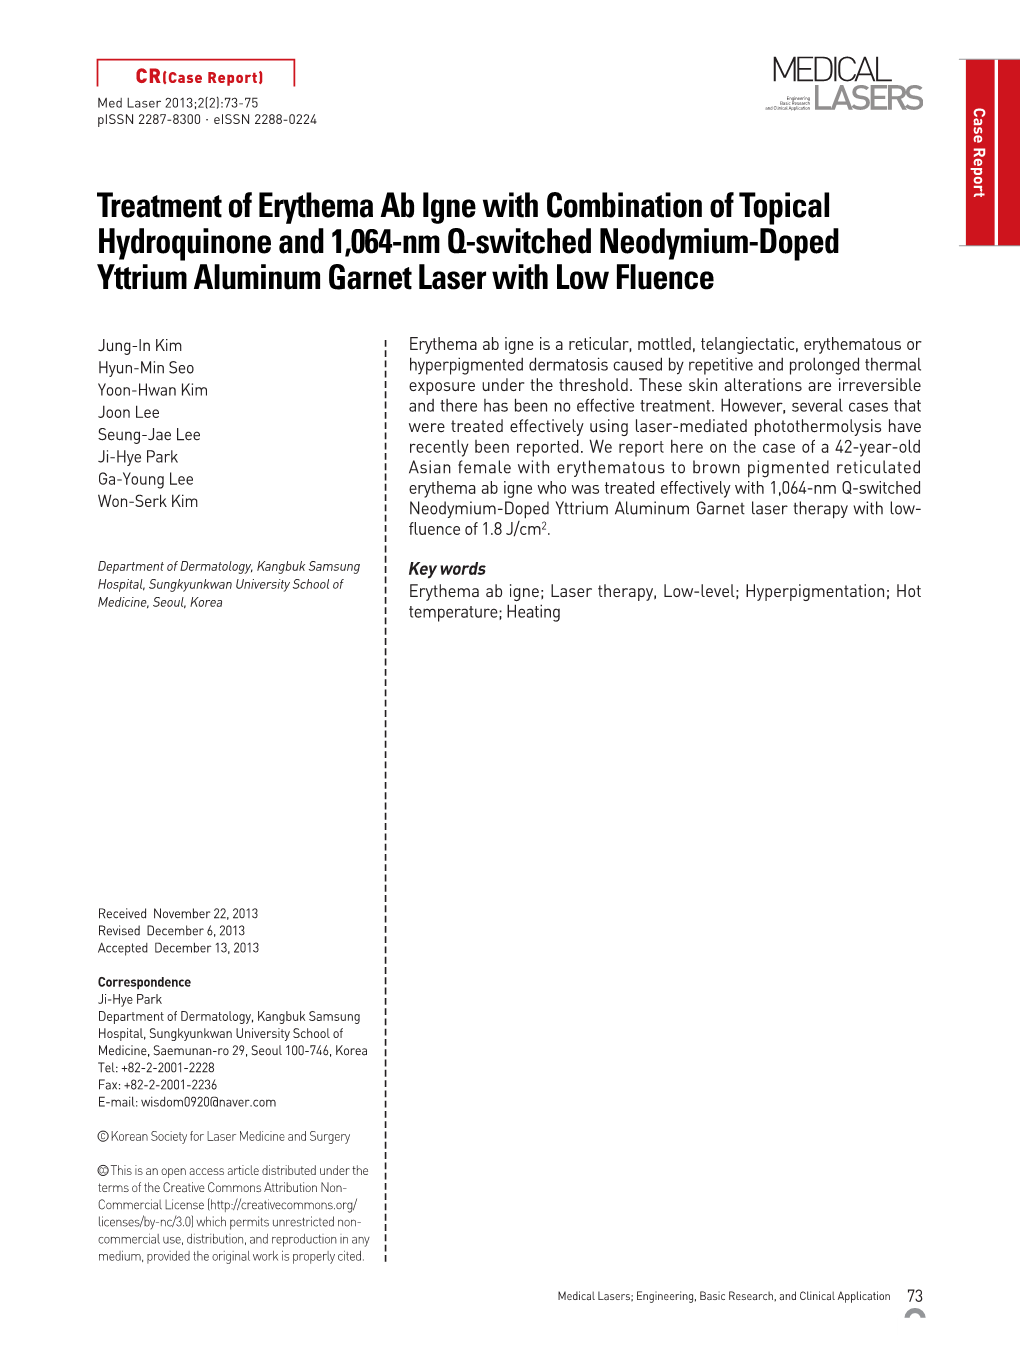 Treatment of Erythema Ab Igne with Combination of Topical Hydroquinone and 1,064-Nm Q-Switched Neodymium-Doped Yttrium Aluminum Garnet Laser with Low Fluence